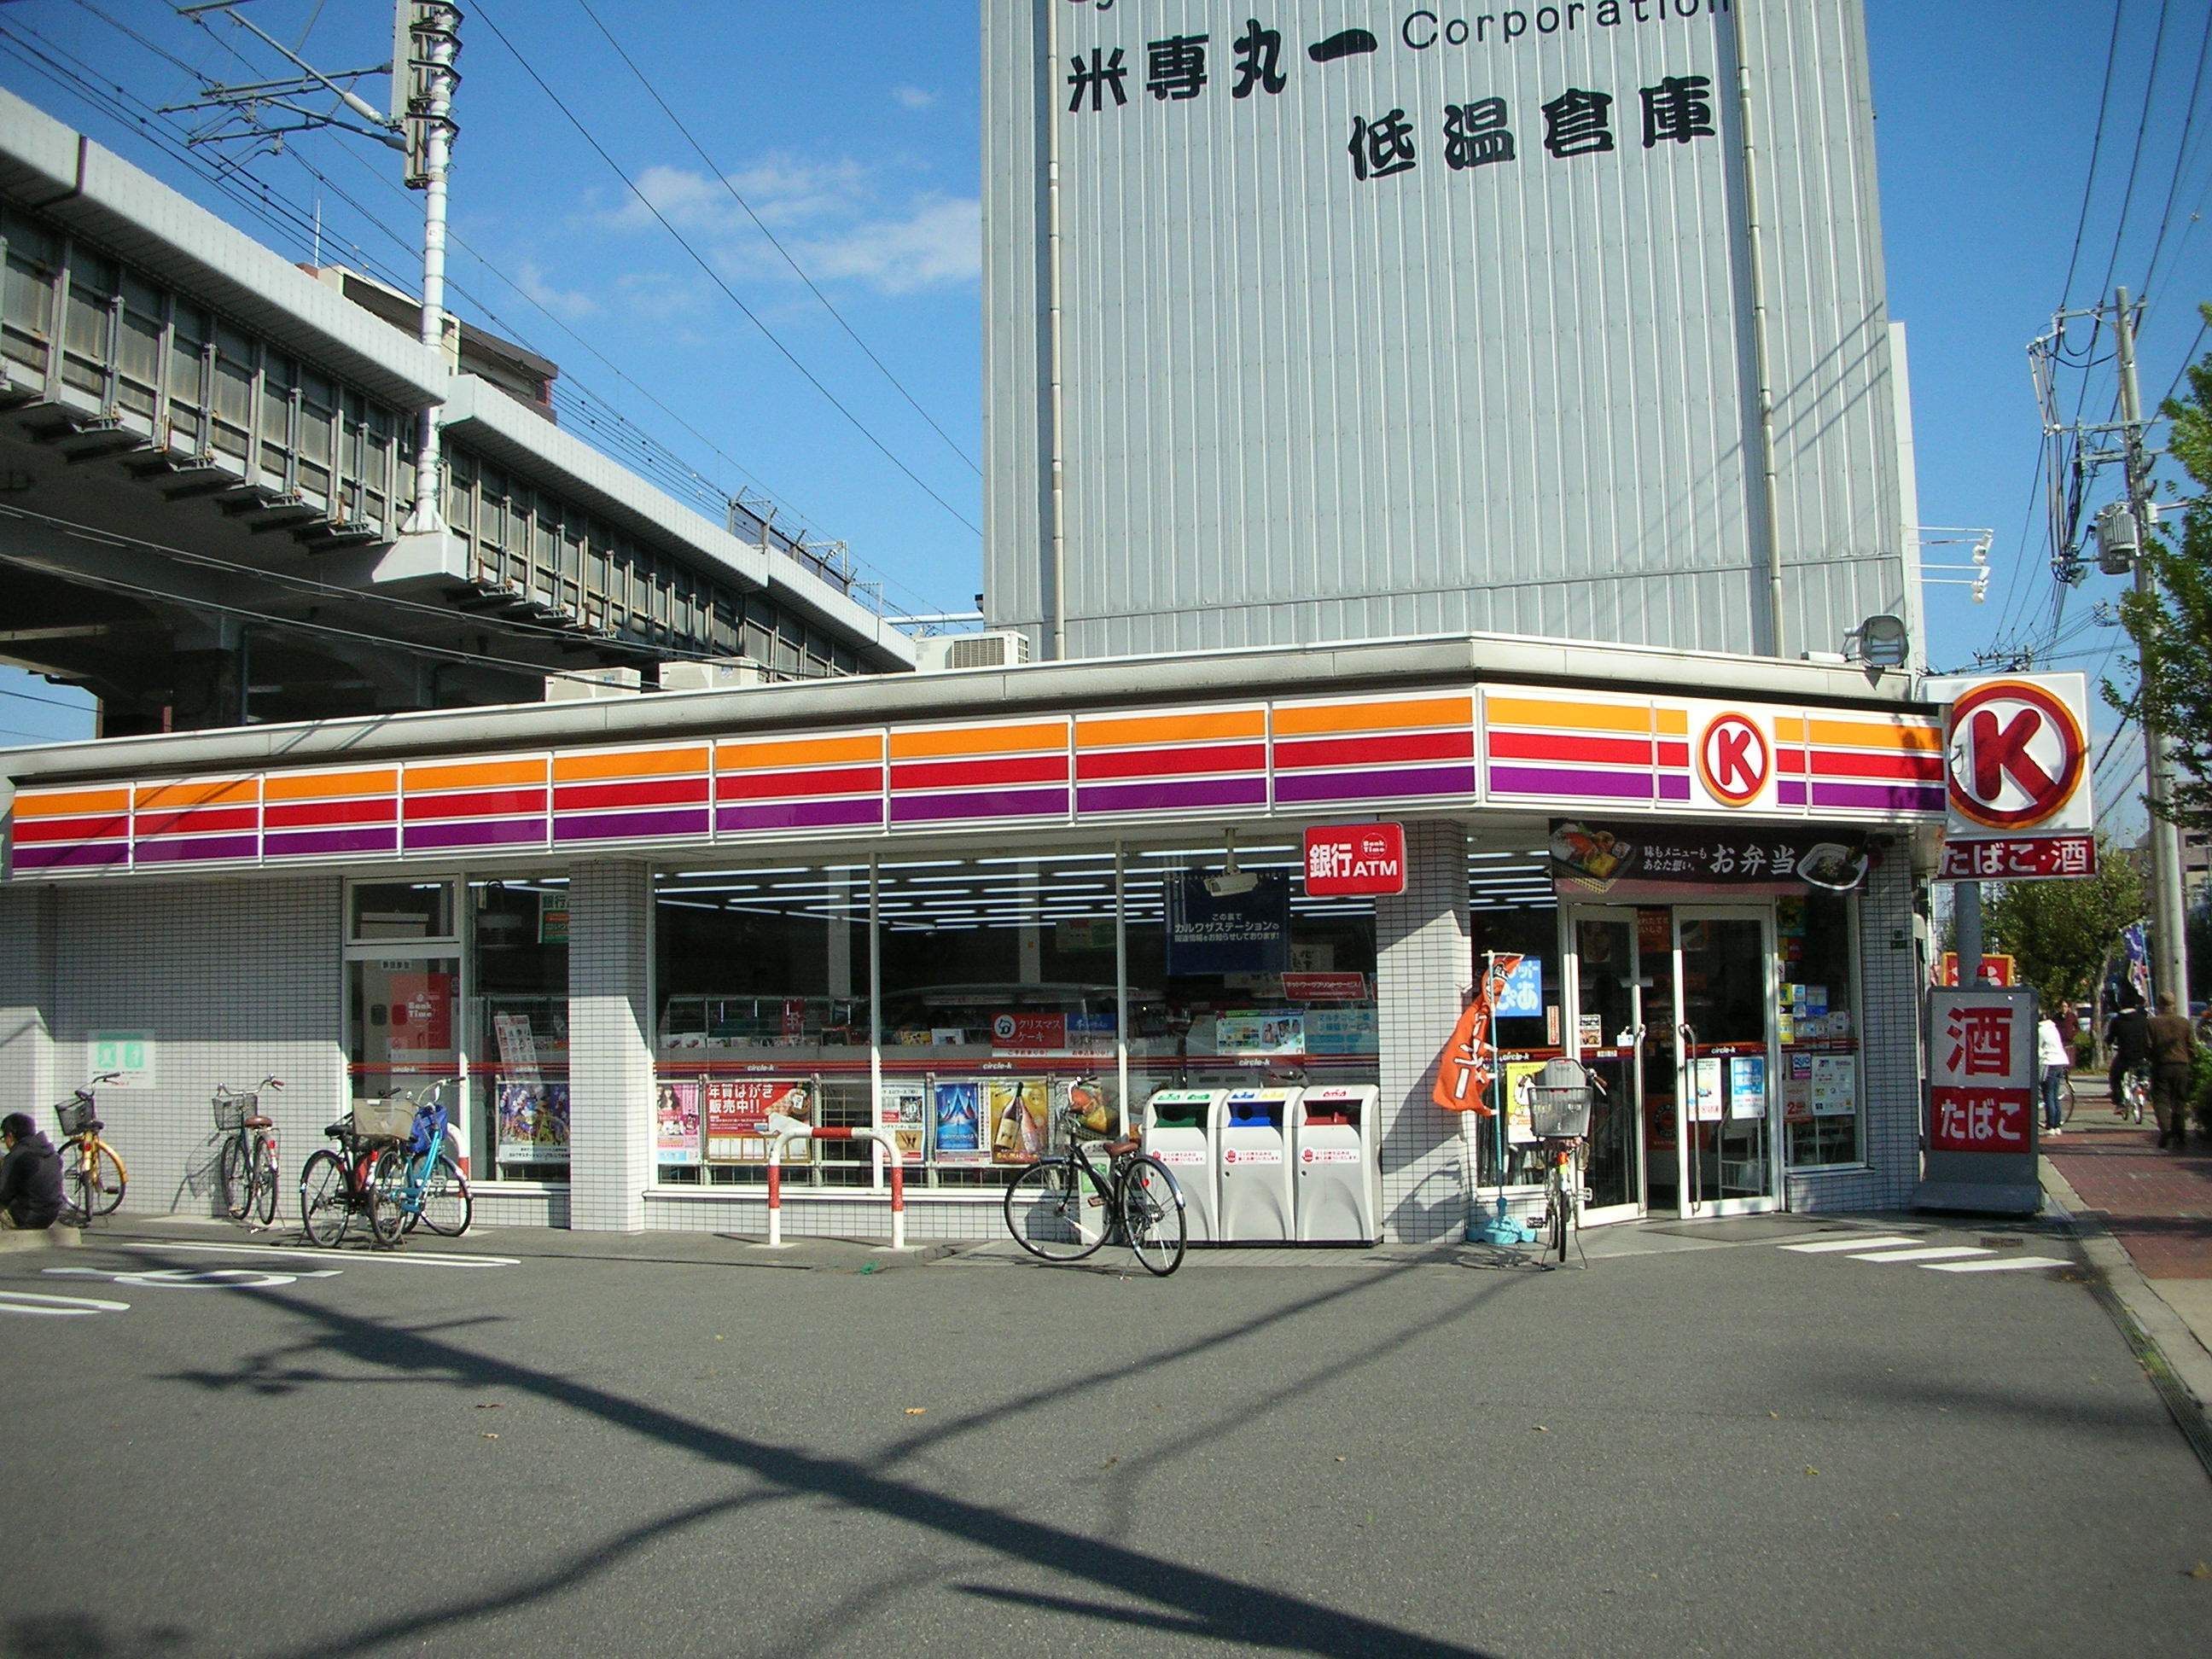 Convenience store. 187m to the Circle K (convenience store)